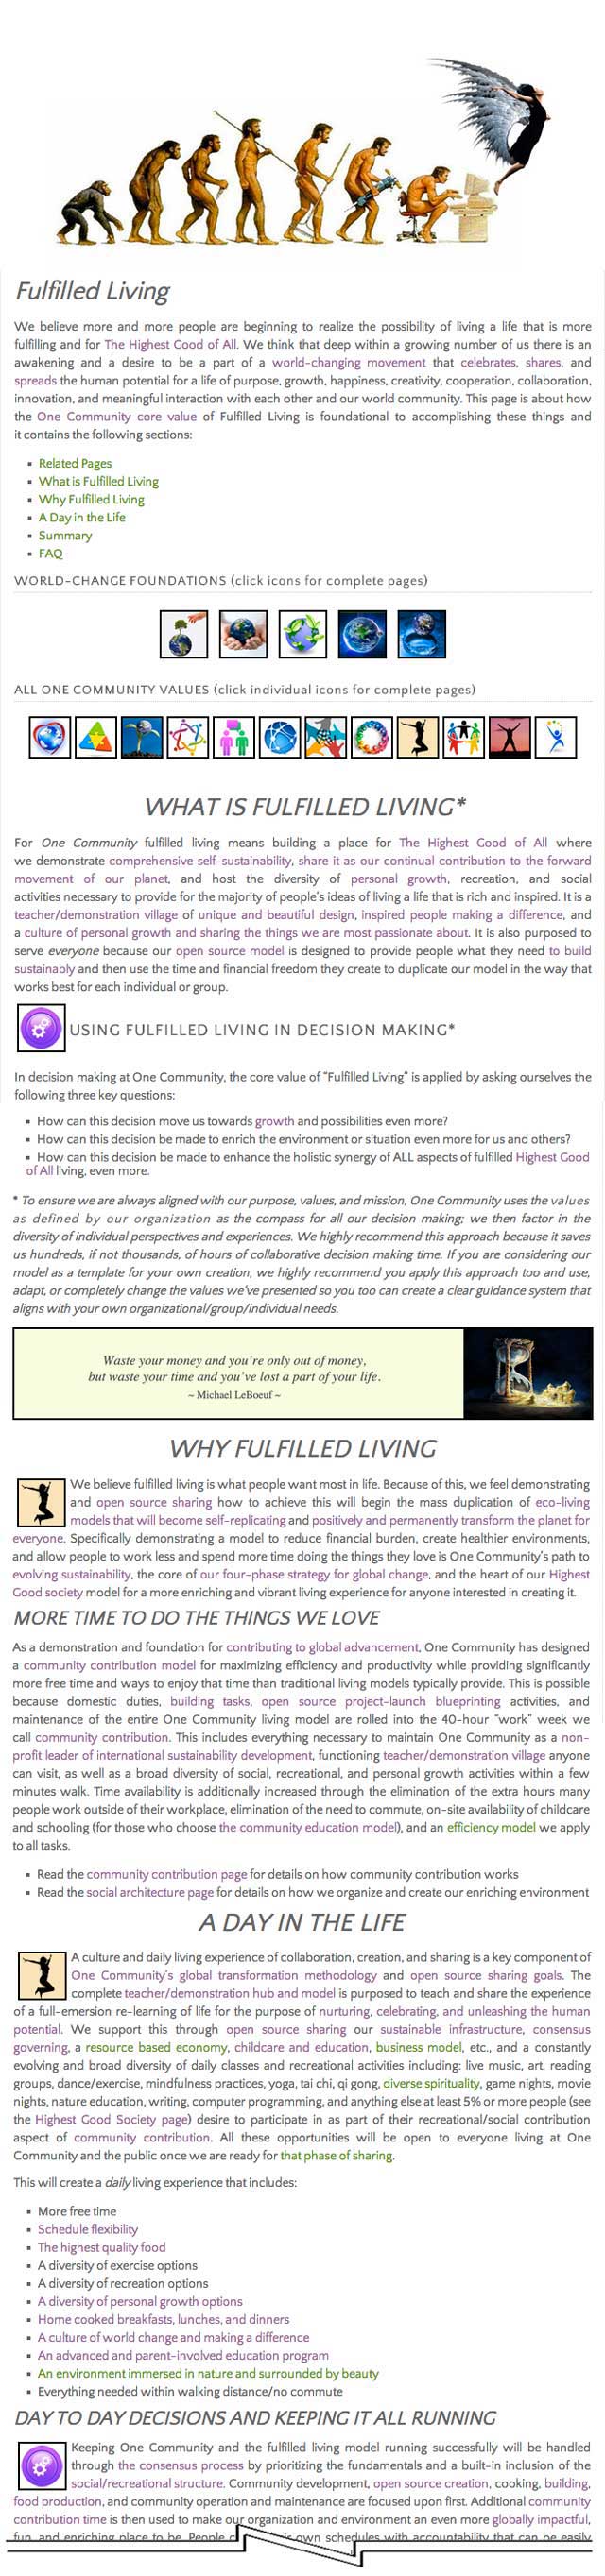 Fulfilled living page, One Community